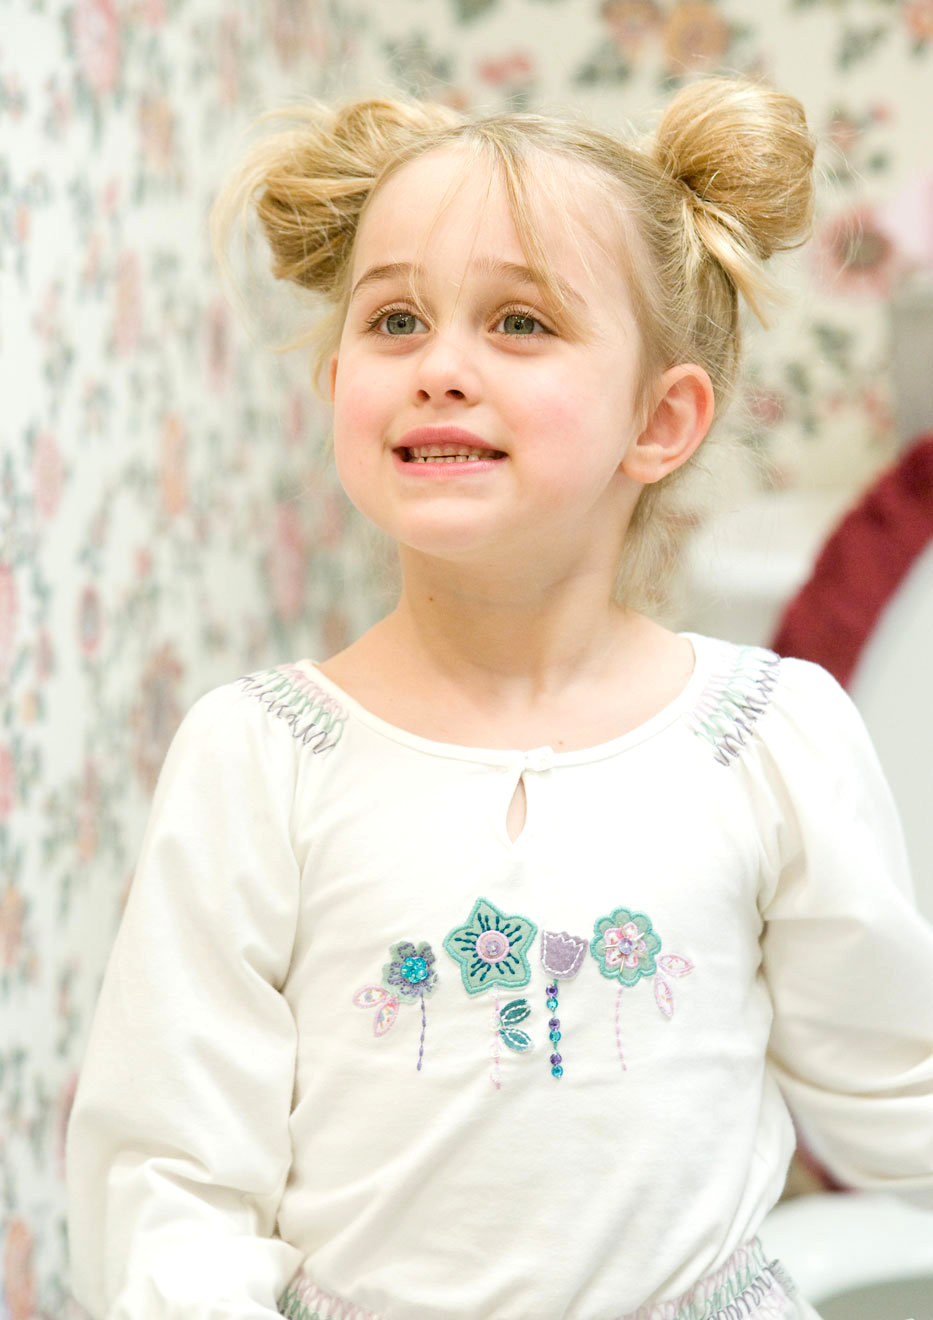 True Bella Pinci stars as Young Kate in New Line Cinema's Four Christmases (2008)